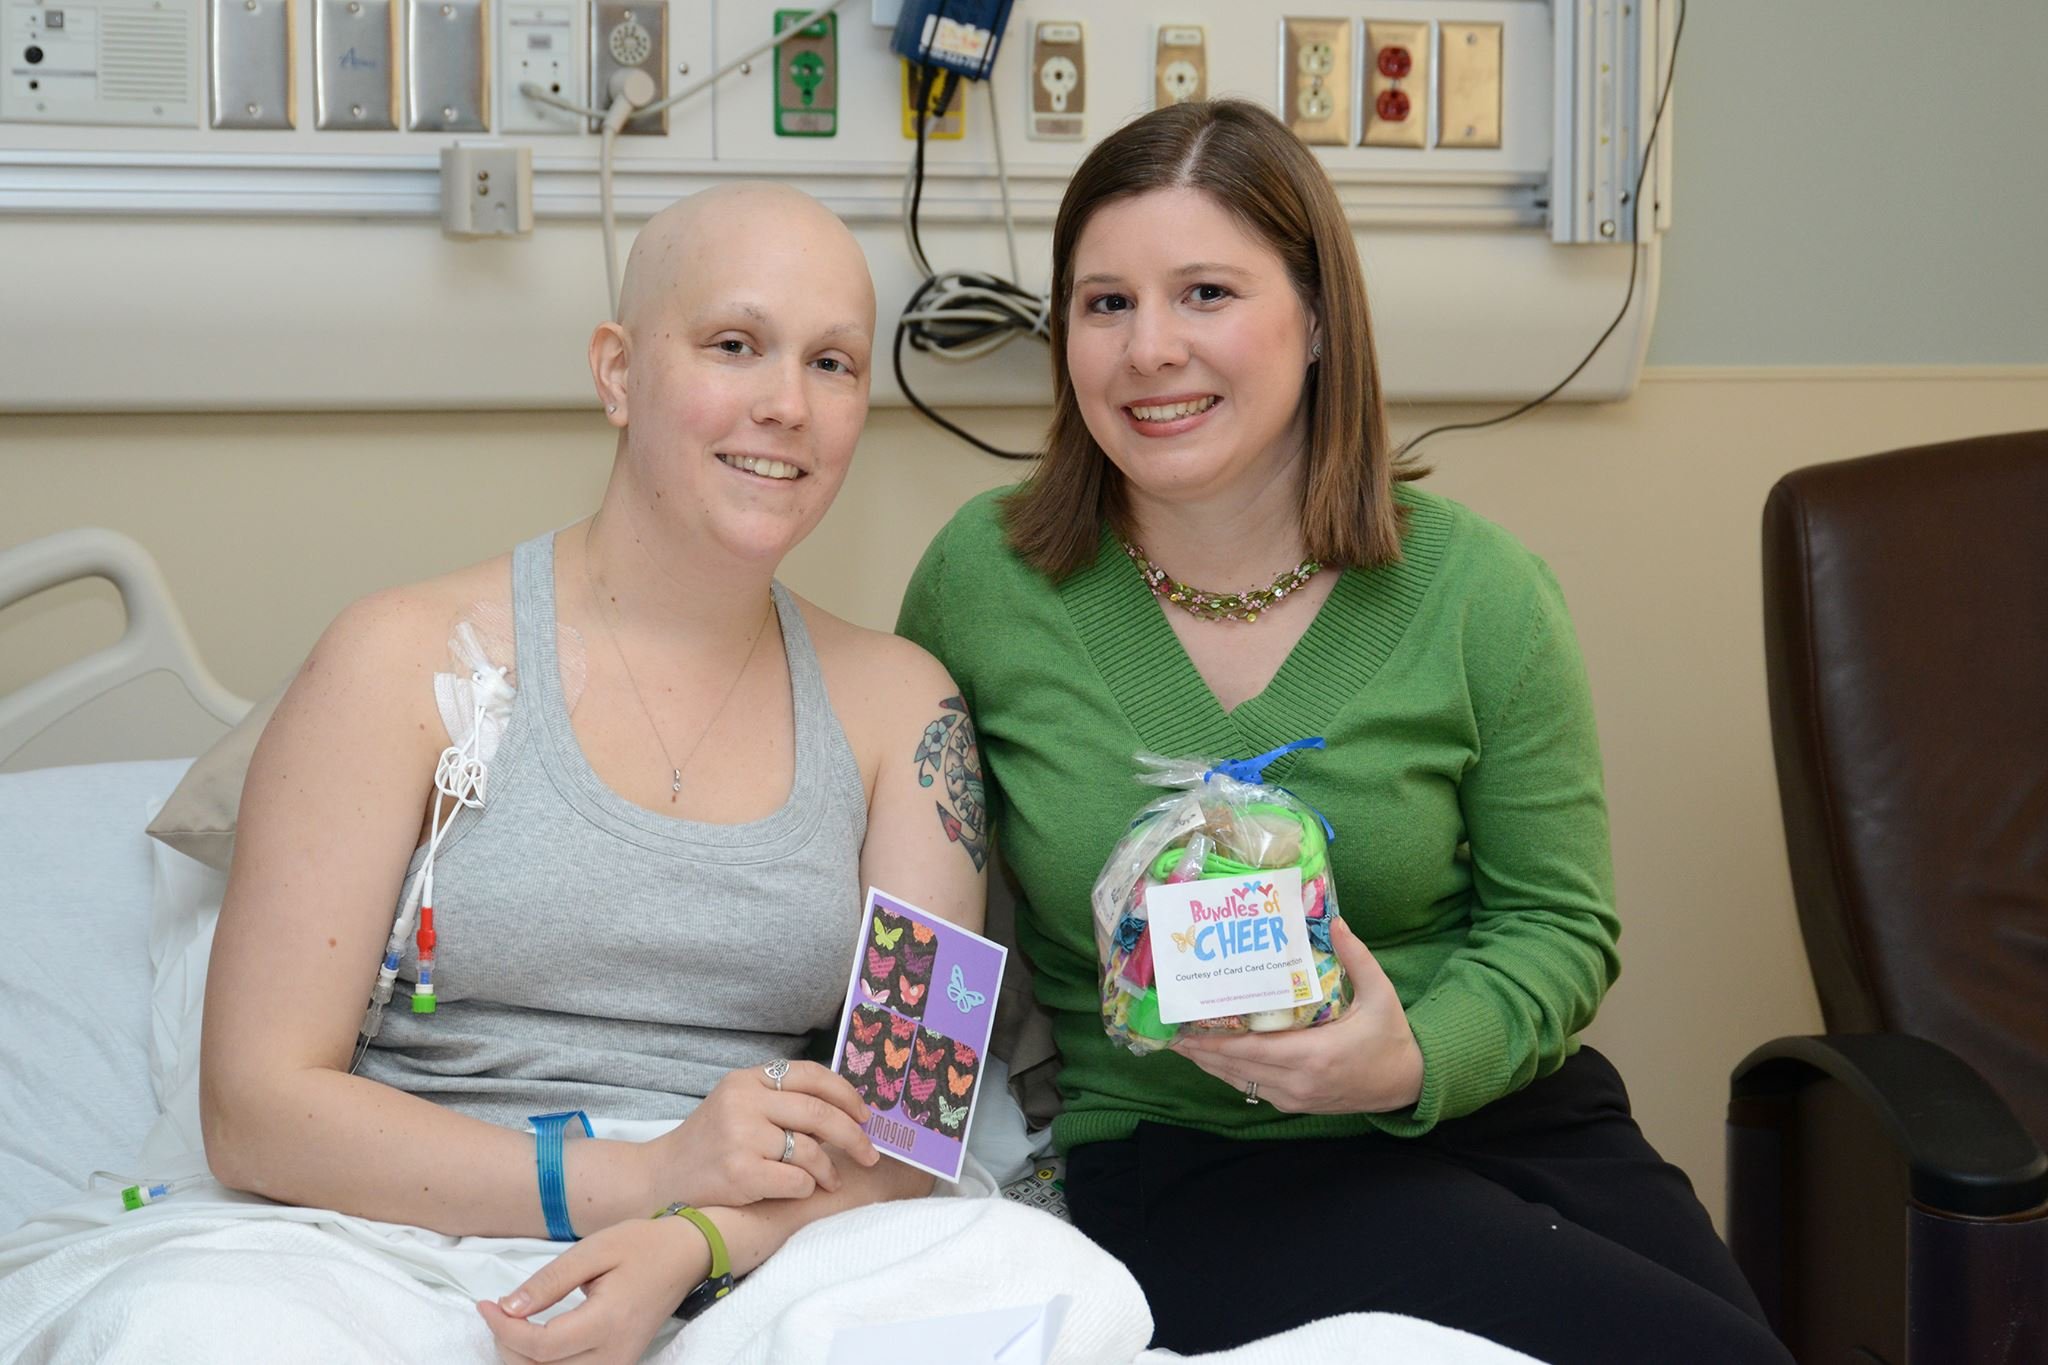 Aleeza pictured with hospital patient holding cards.